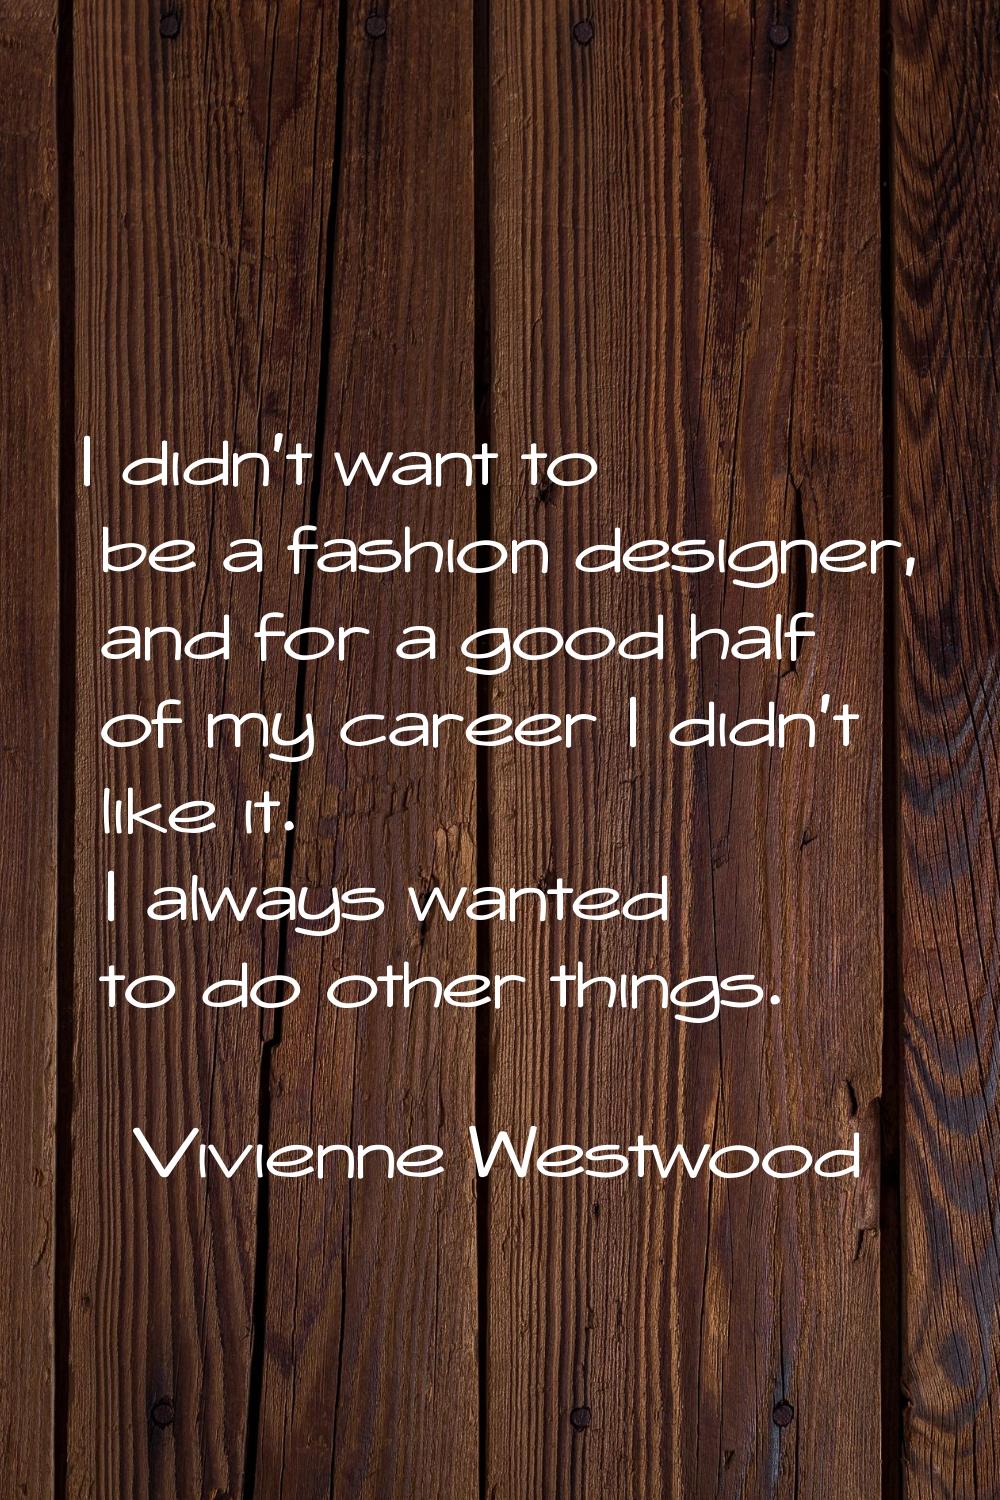 I didn't want to be a fashion designer, and for a good half of my career I didn't like it. I always